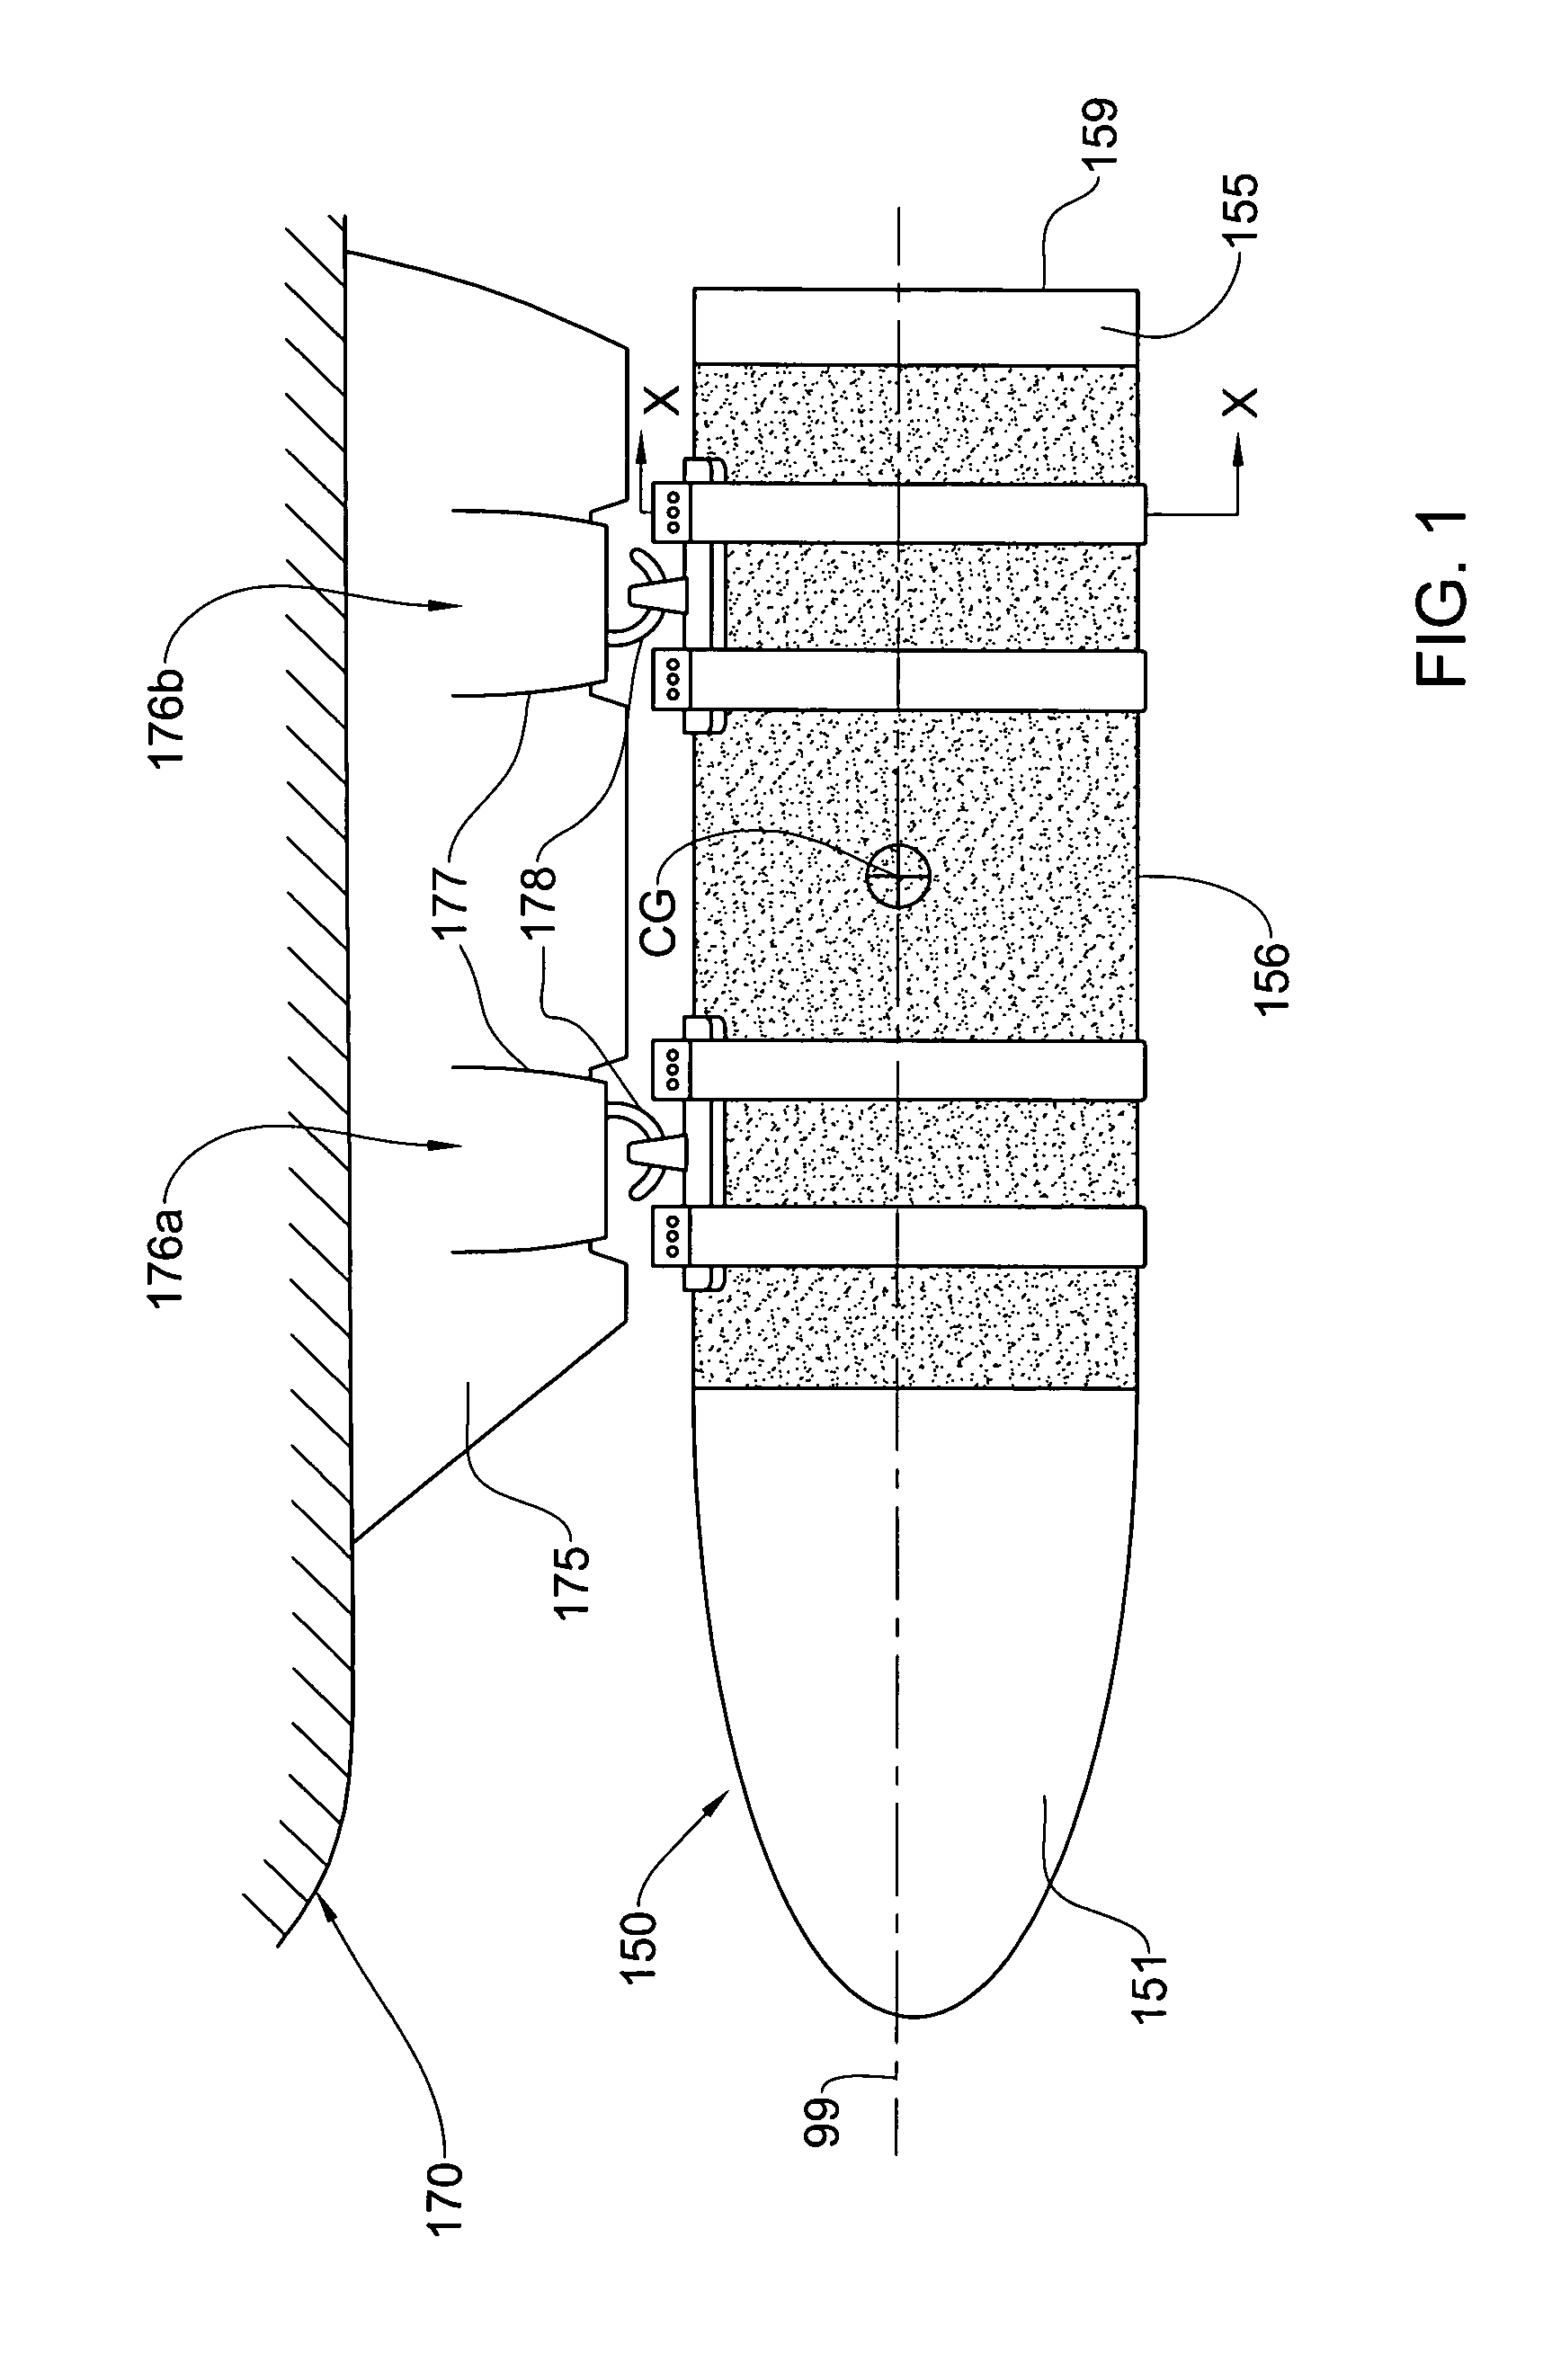 Mounting set, system and method